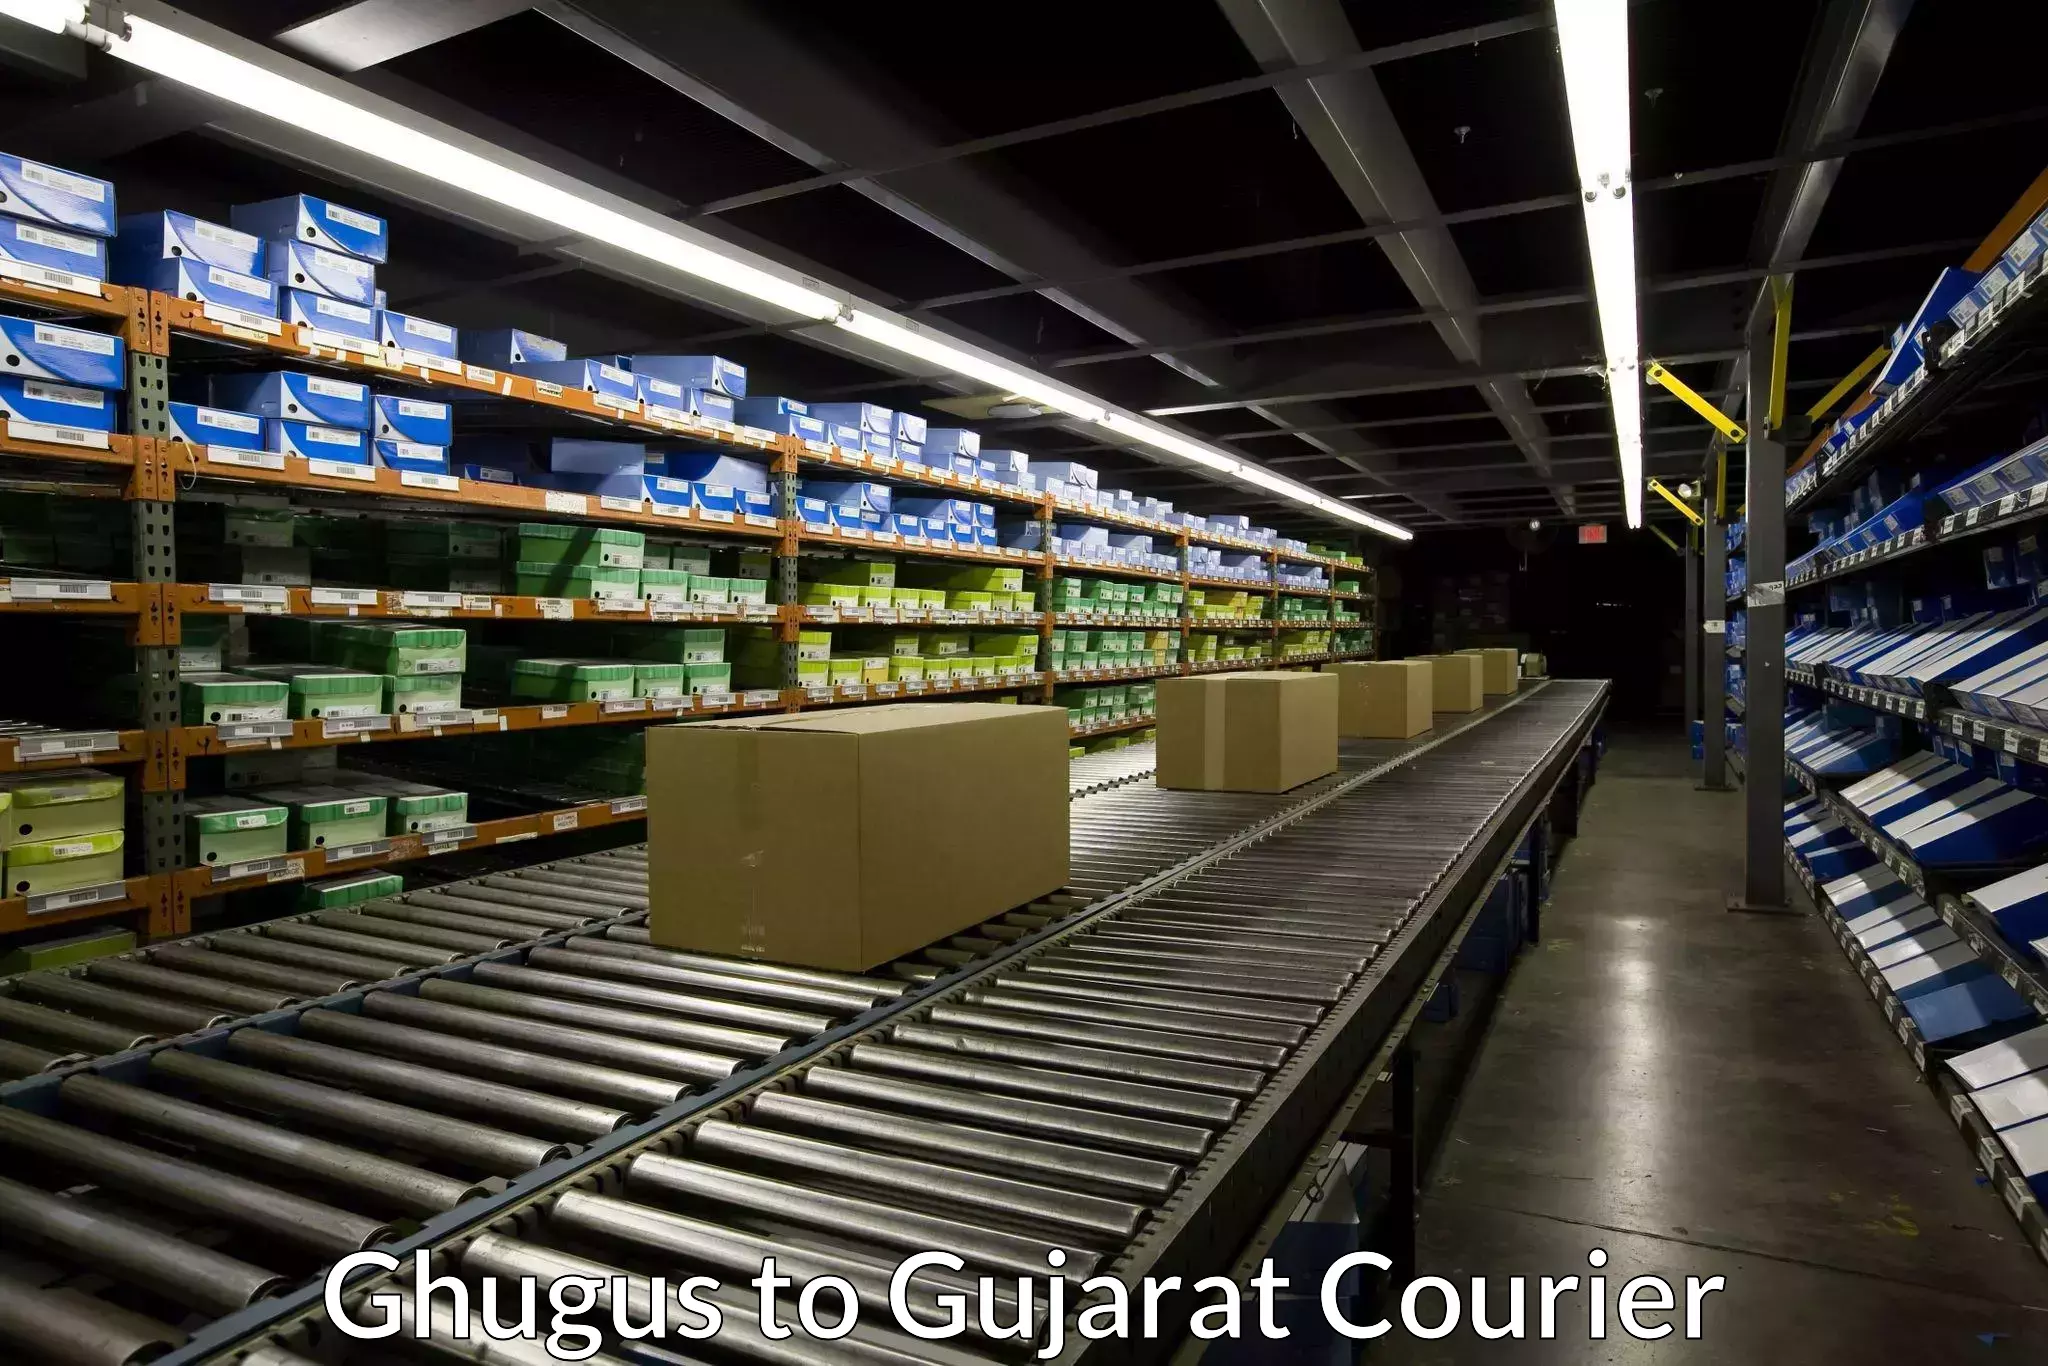 Courier service innovation Ghugus to Gujarat